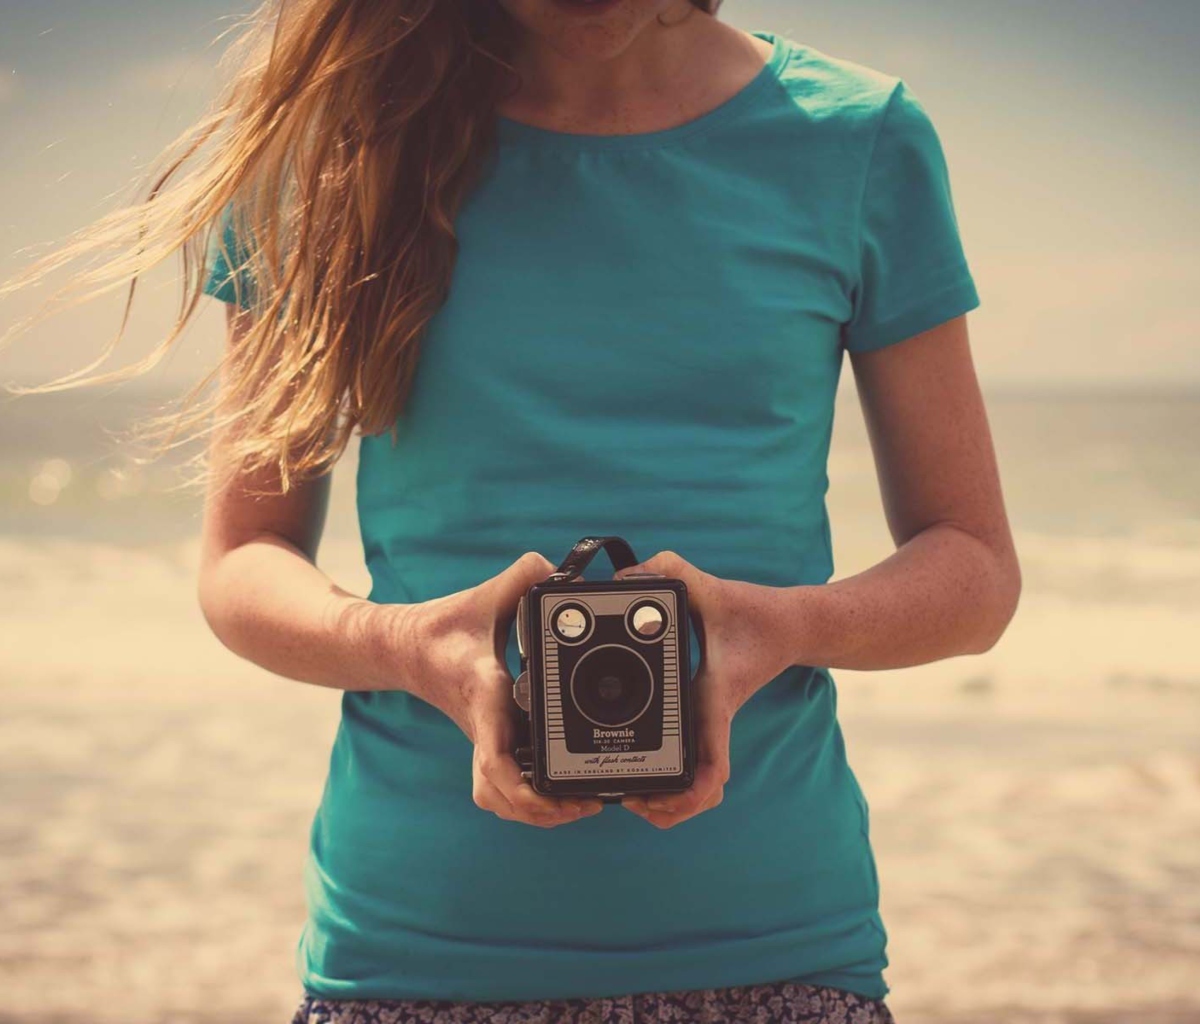 Girl On Beach With Retro Camera In Hands wallpaper 1200x1024